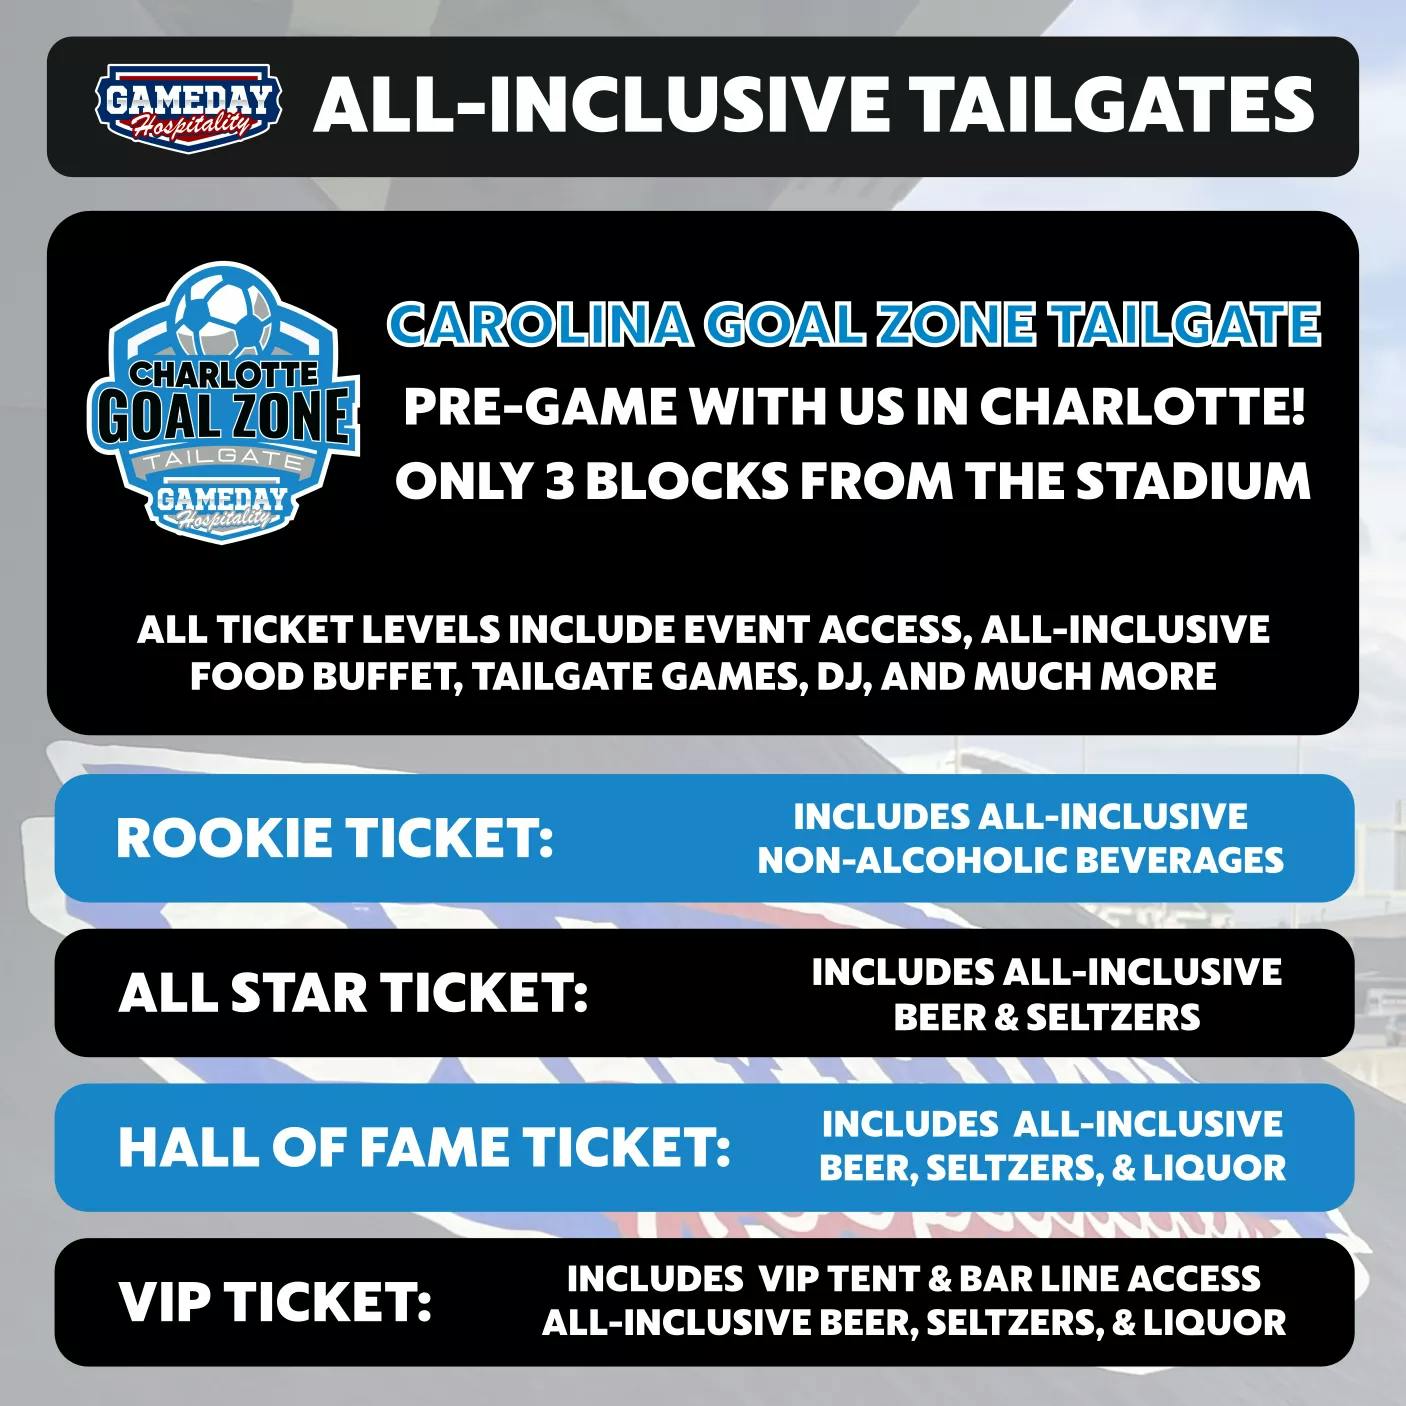 GAMEDAY HOSPITALITY CHARLOTTE TAILGATE SOCCER Seating Map Seating Chart